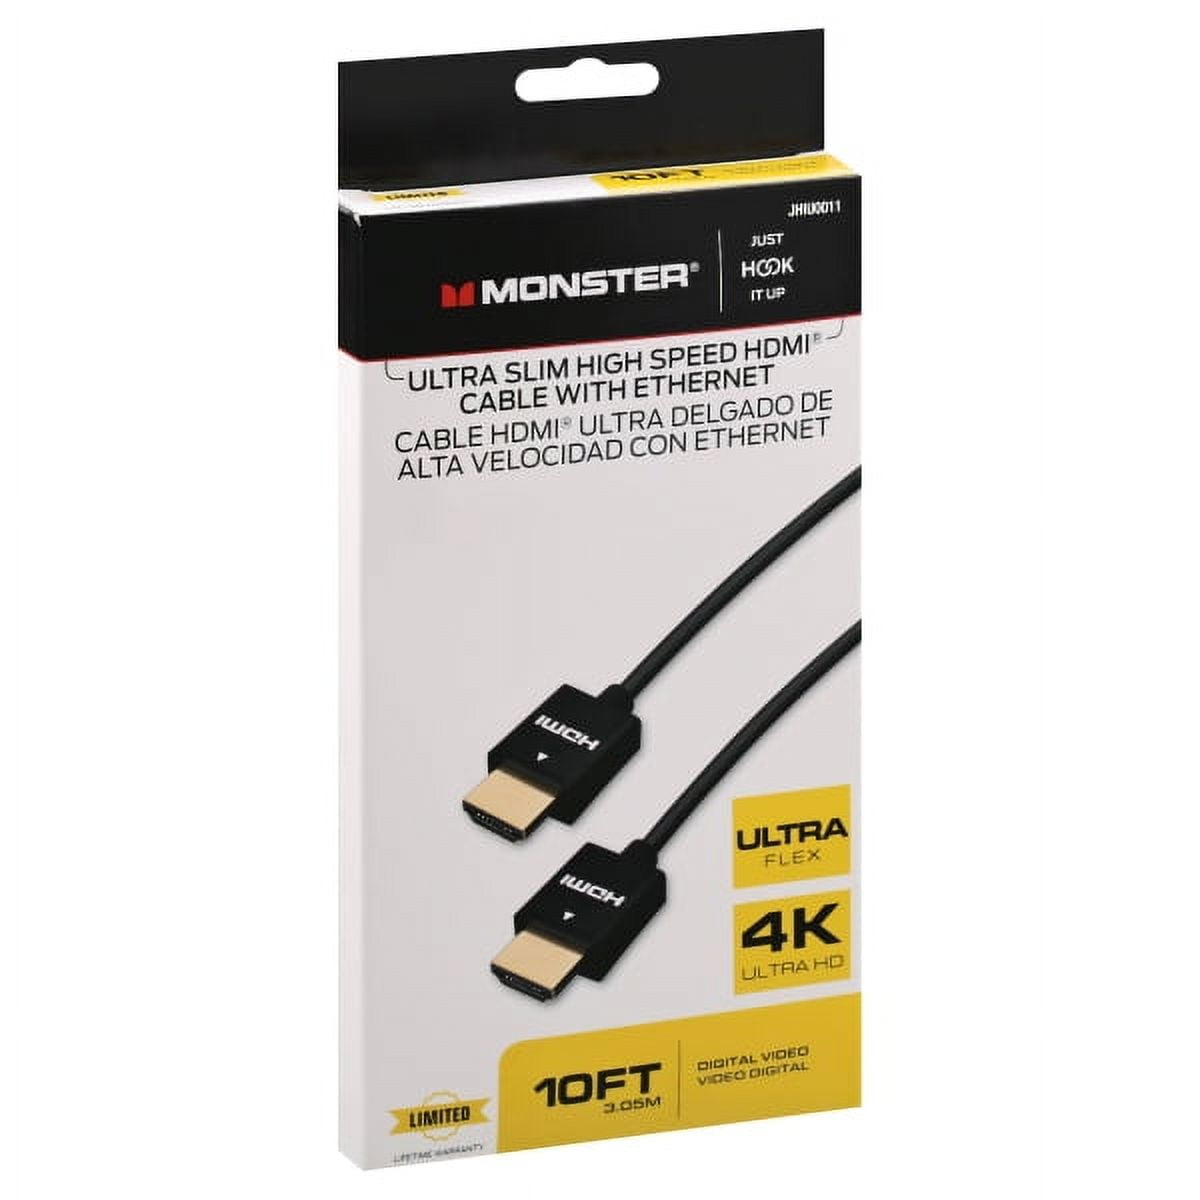 2 Monster JHIU0019 Just Hook It Up HDMI Switch, 3 Way **NEW**